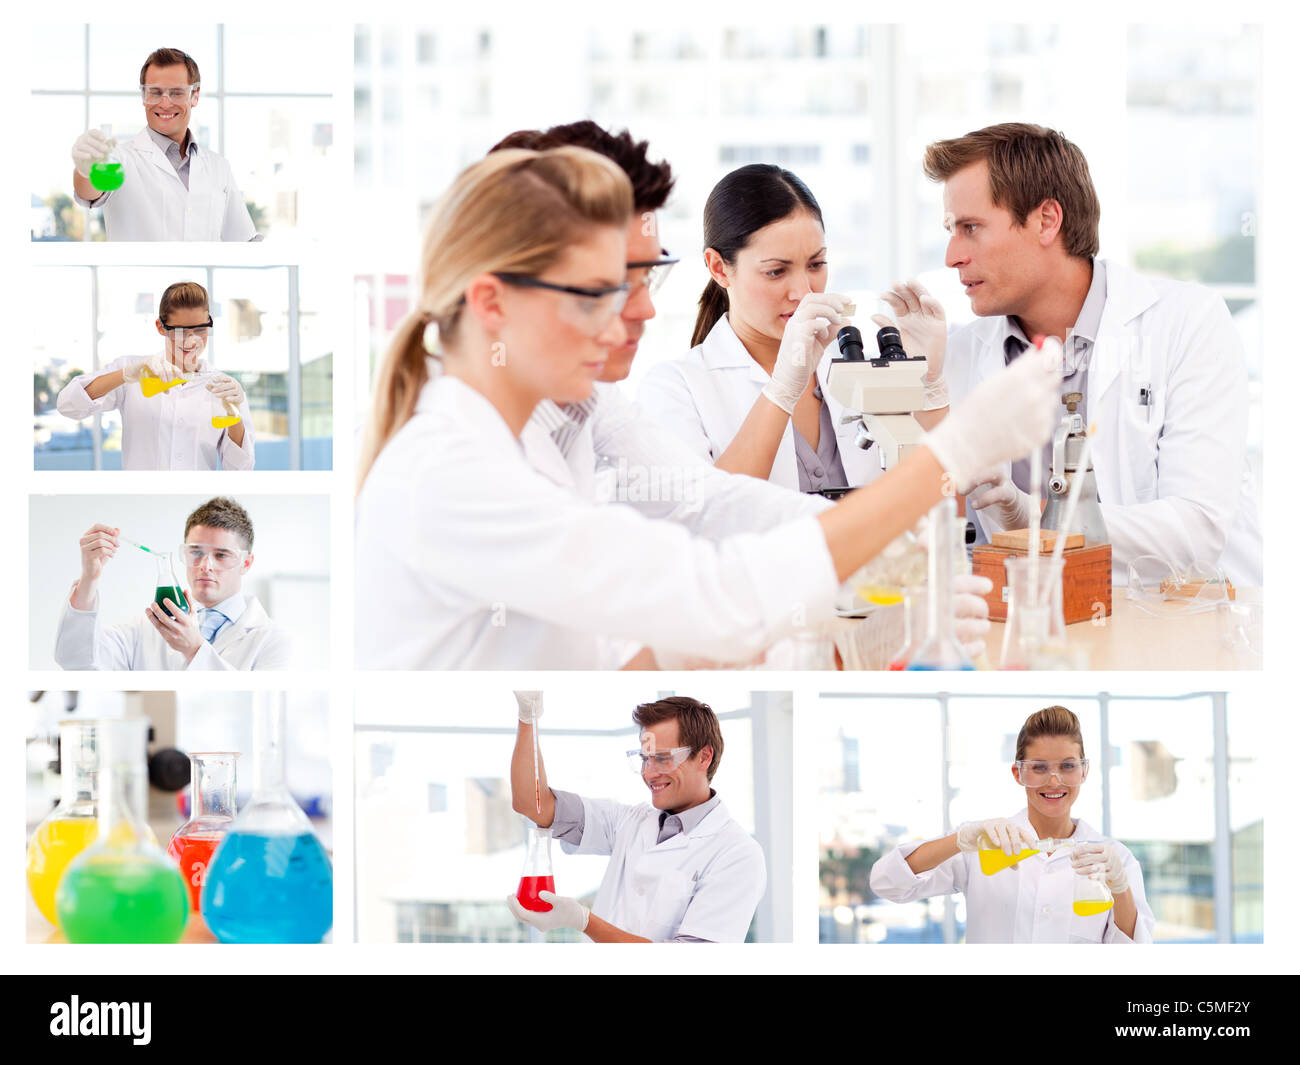 Collage of several scientists doing experiments Stock Photo